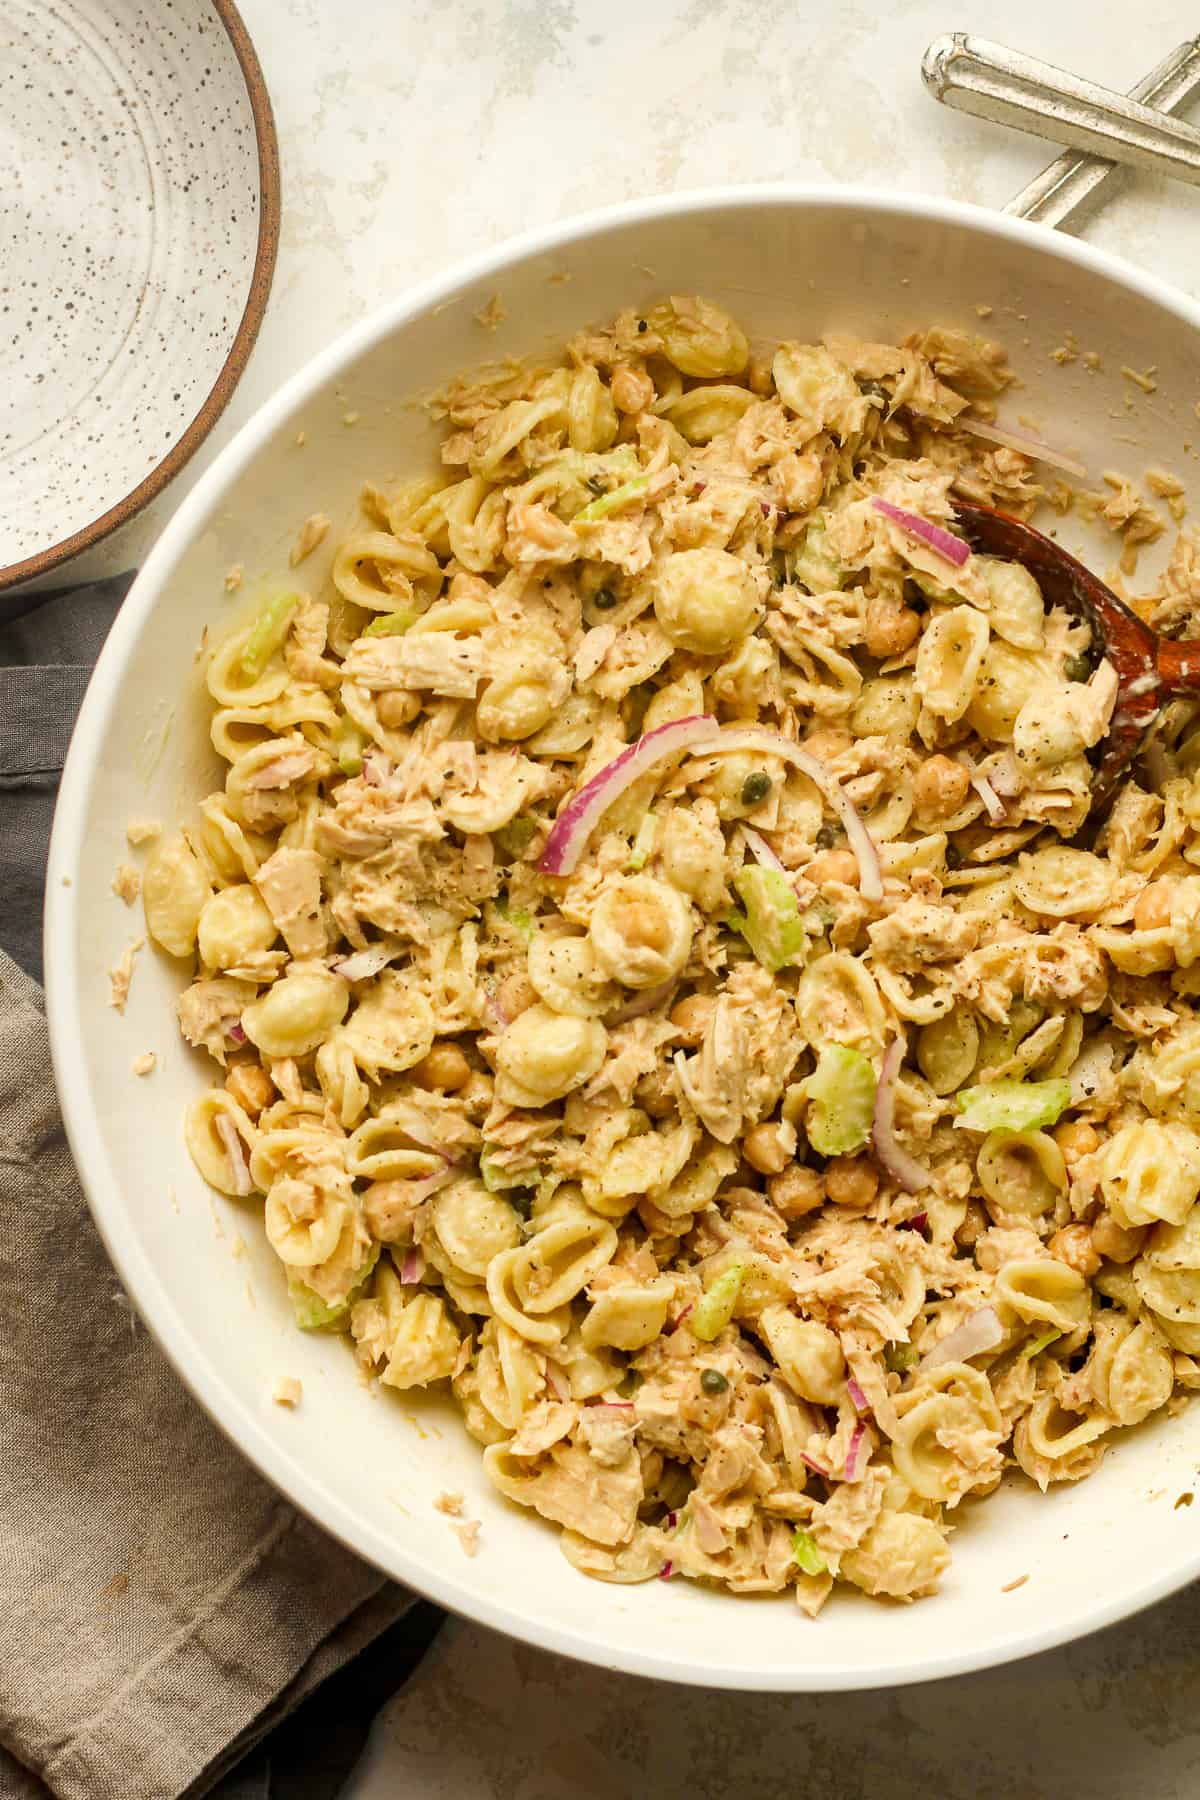 A large bowl of tuna pasta salad with chickpeas.